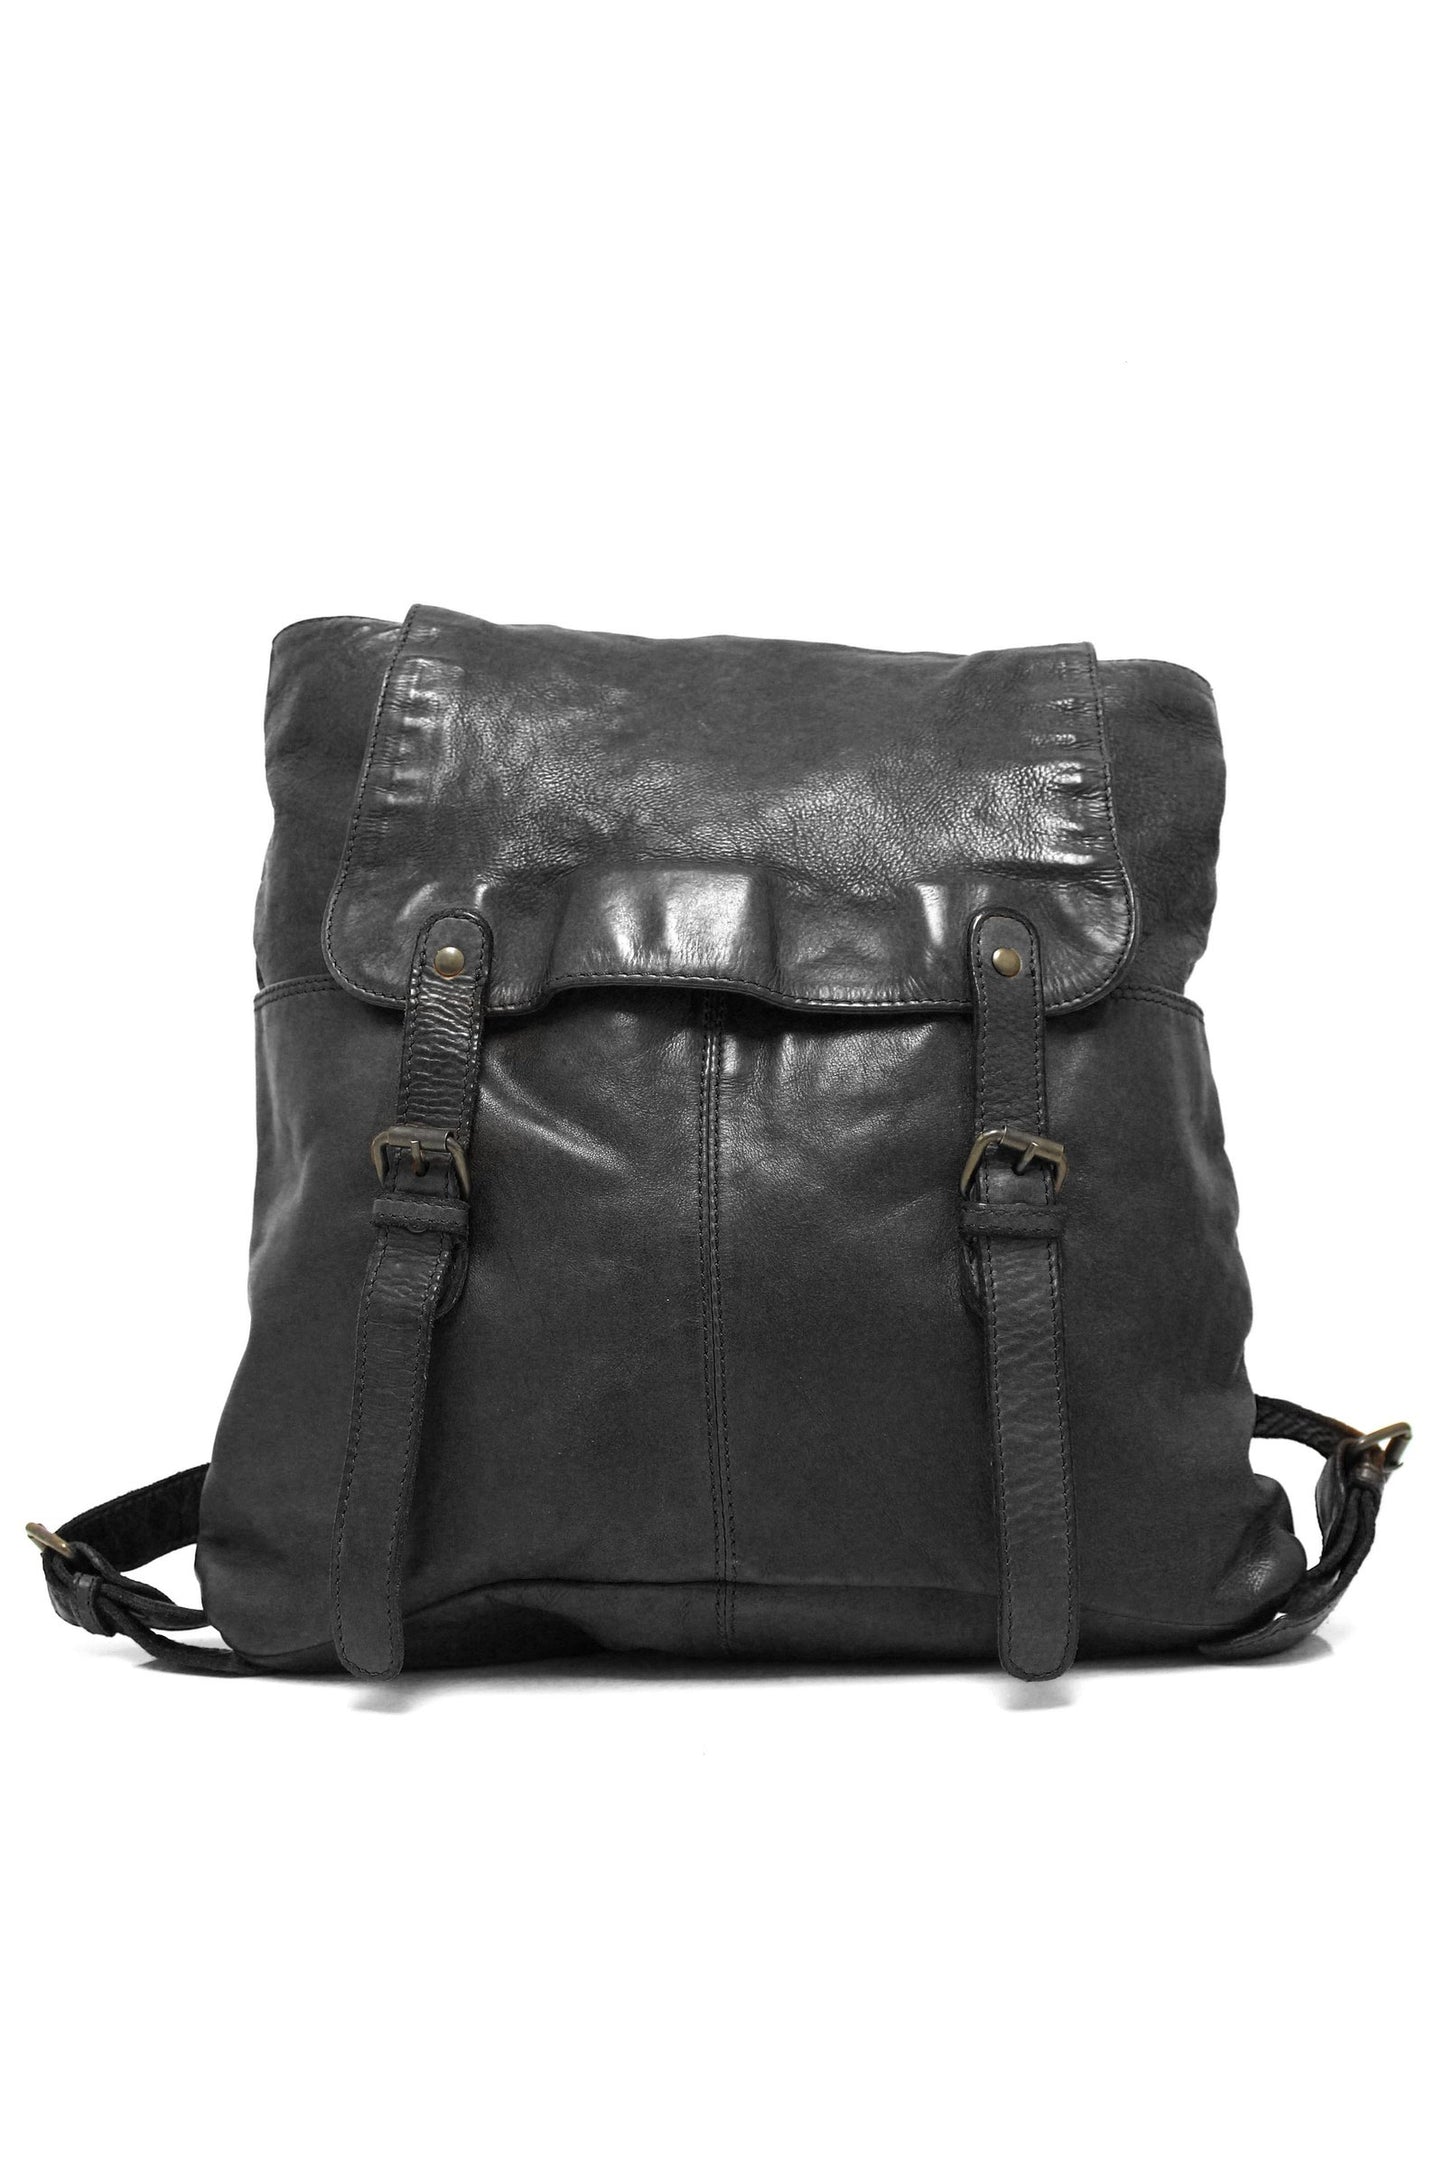 THE TREND Back Pack Style: 22345